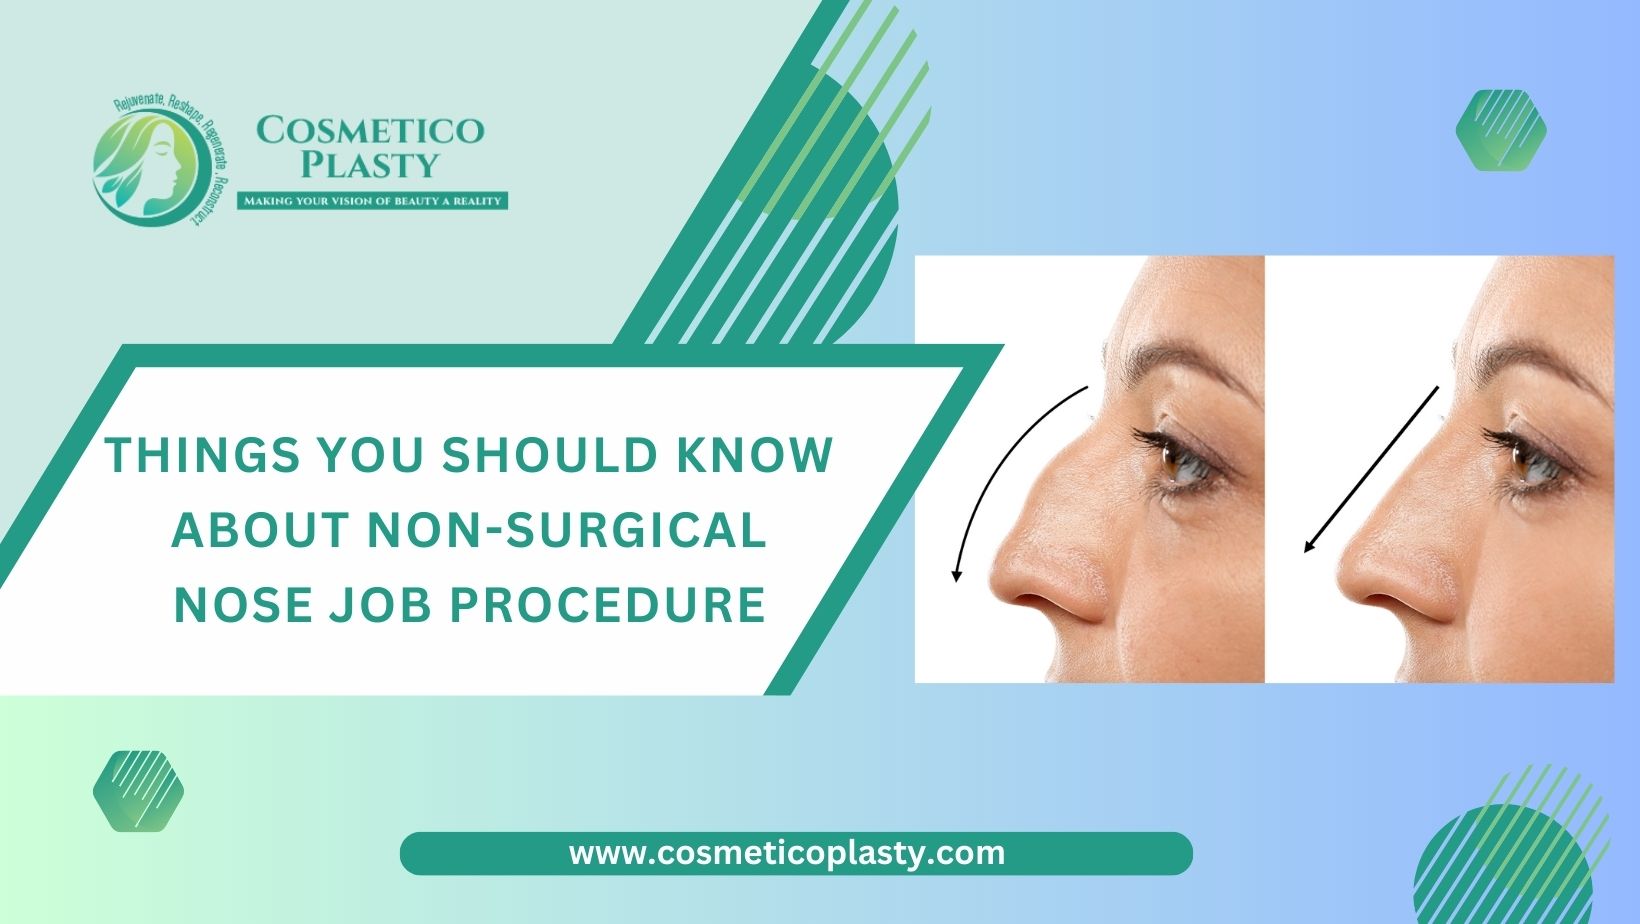 Things you should know about non-surgical nose job procedure